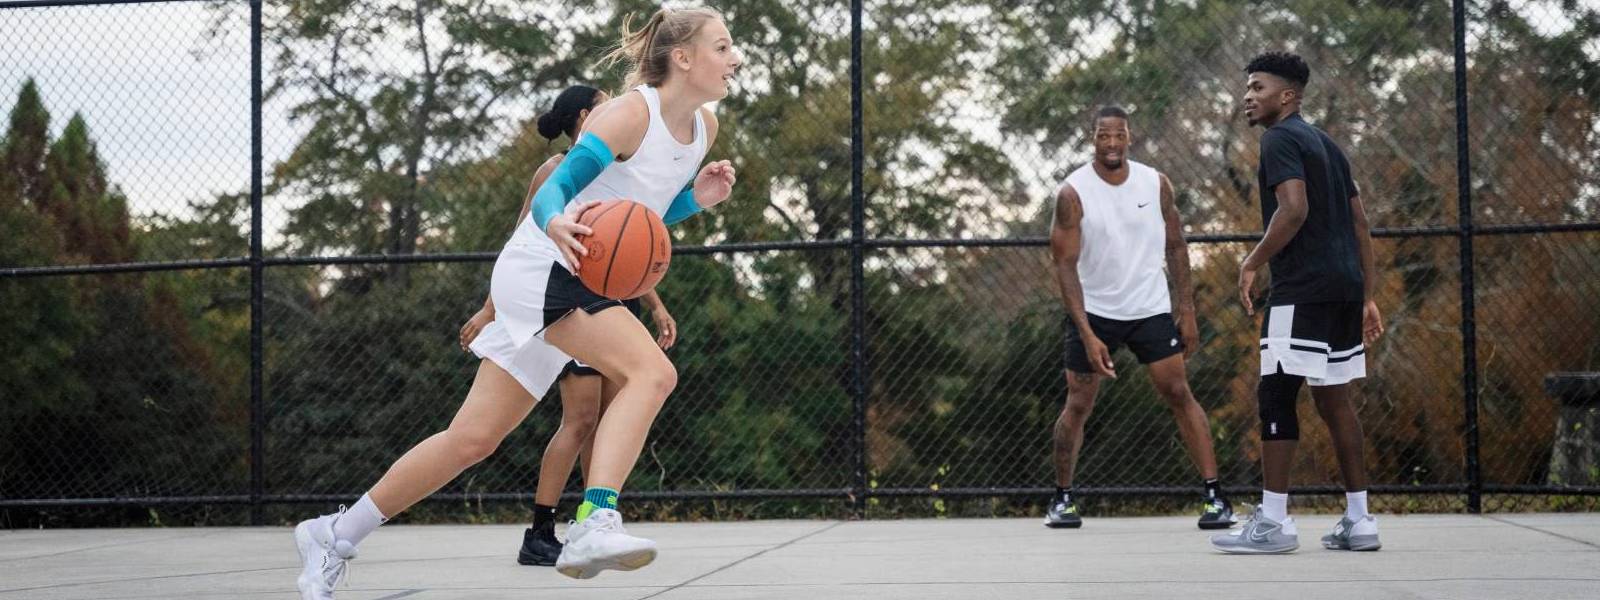 Basketball player dribbles past her opponents on a free space and wears blue arm Sleeves